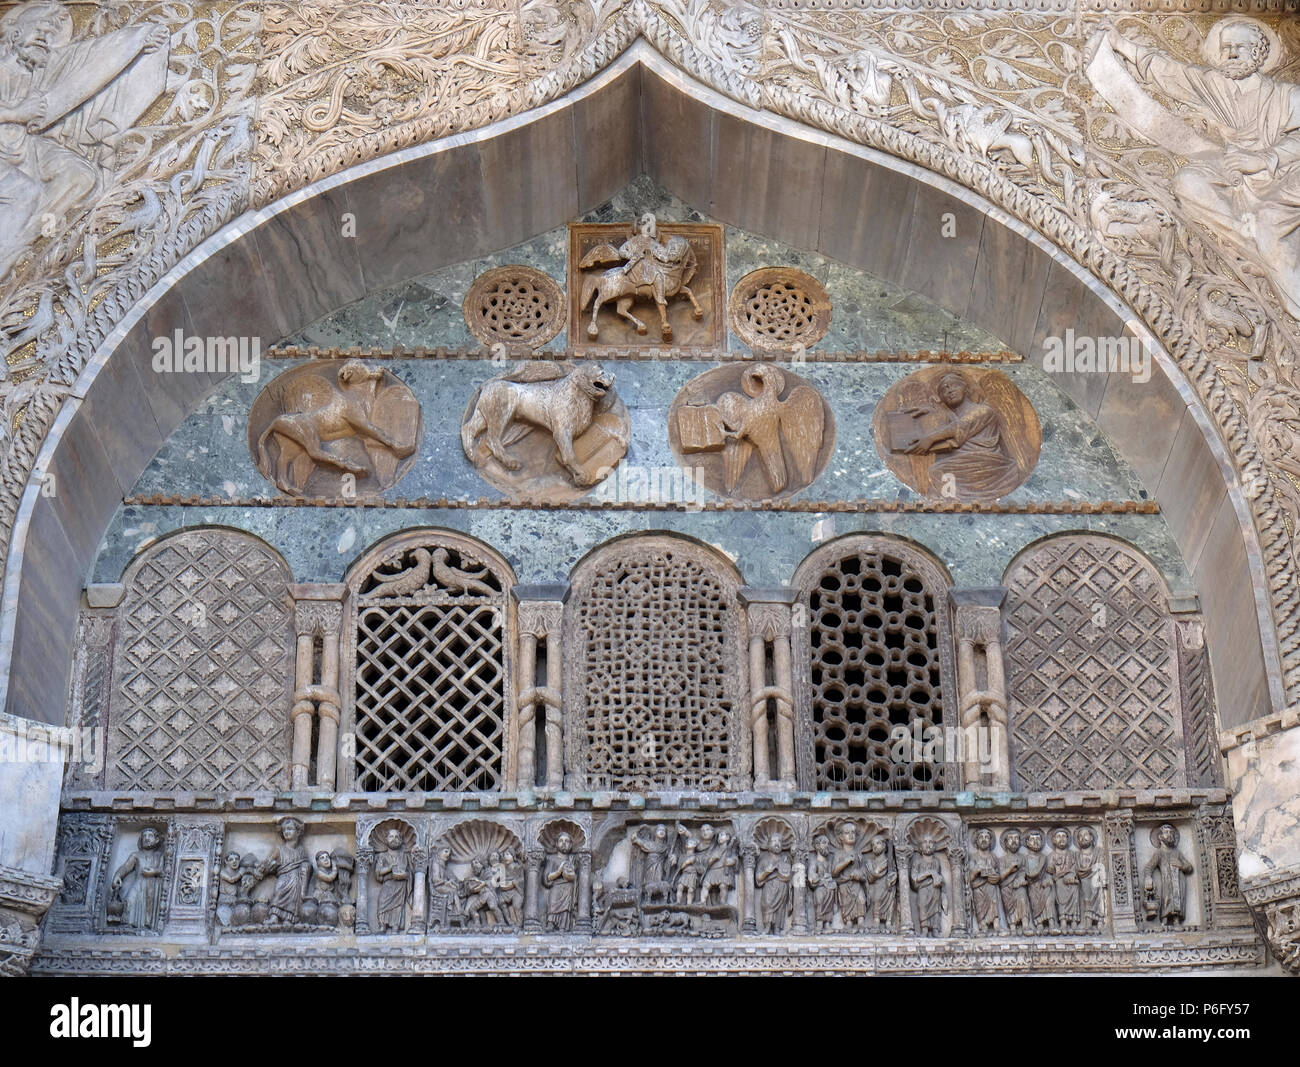 Symbols of the Four Evangelists, facade detail of St. Mark's Basilica, St. Mark's Square, Venice, Italy Stock Photo